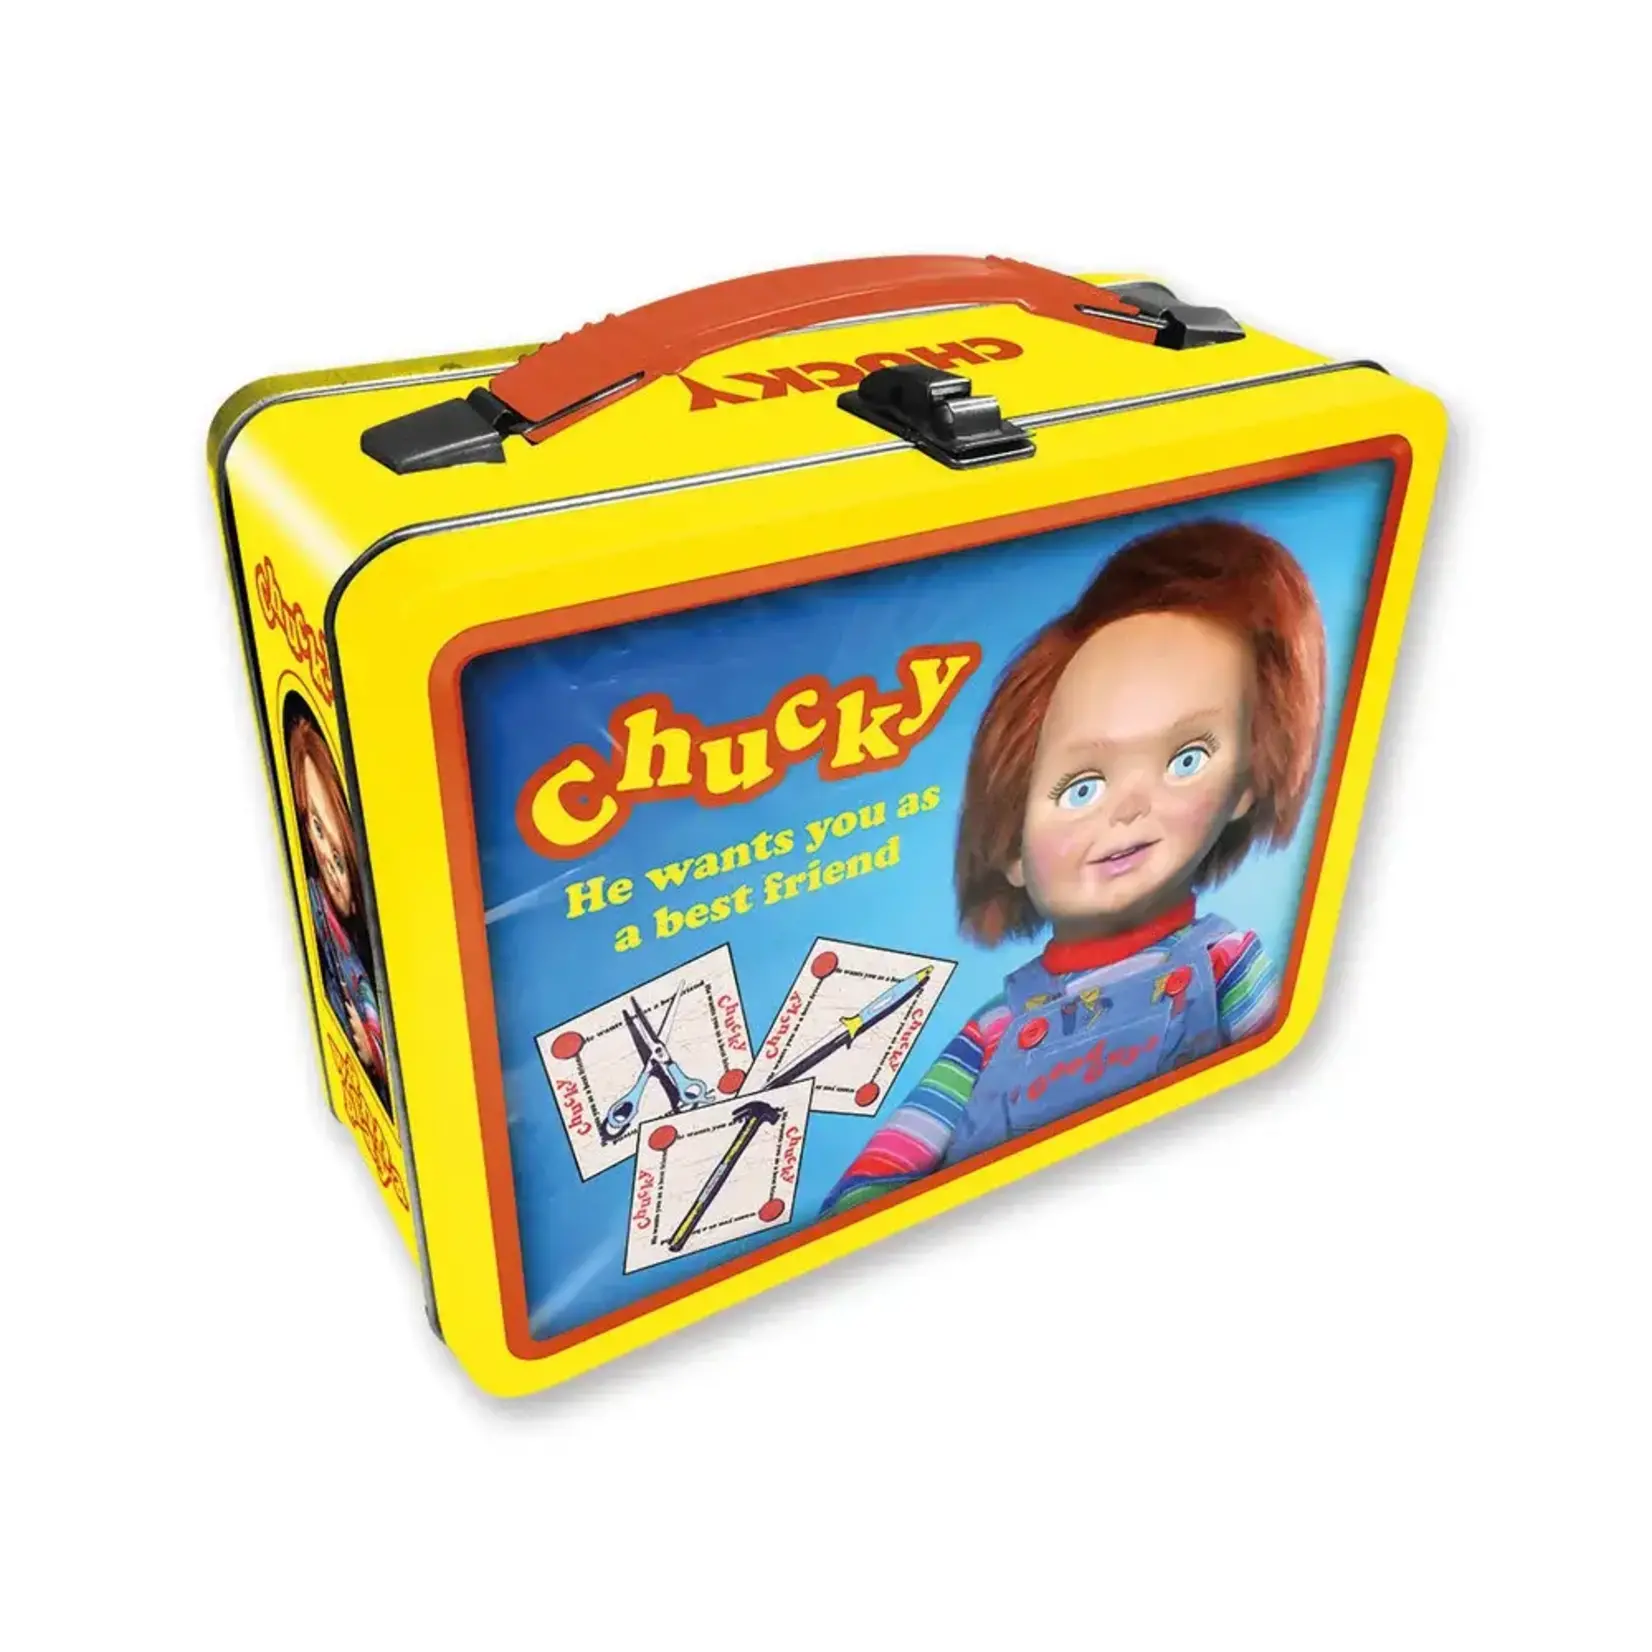 Lunch Box - Child's Play: Chucky